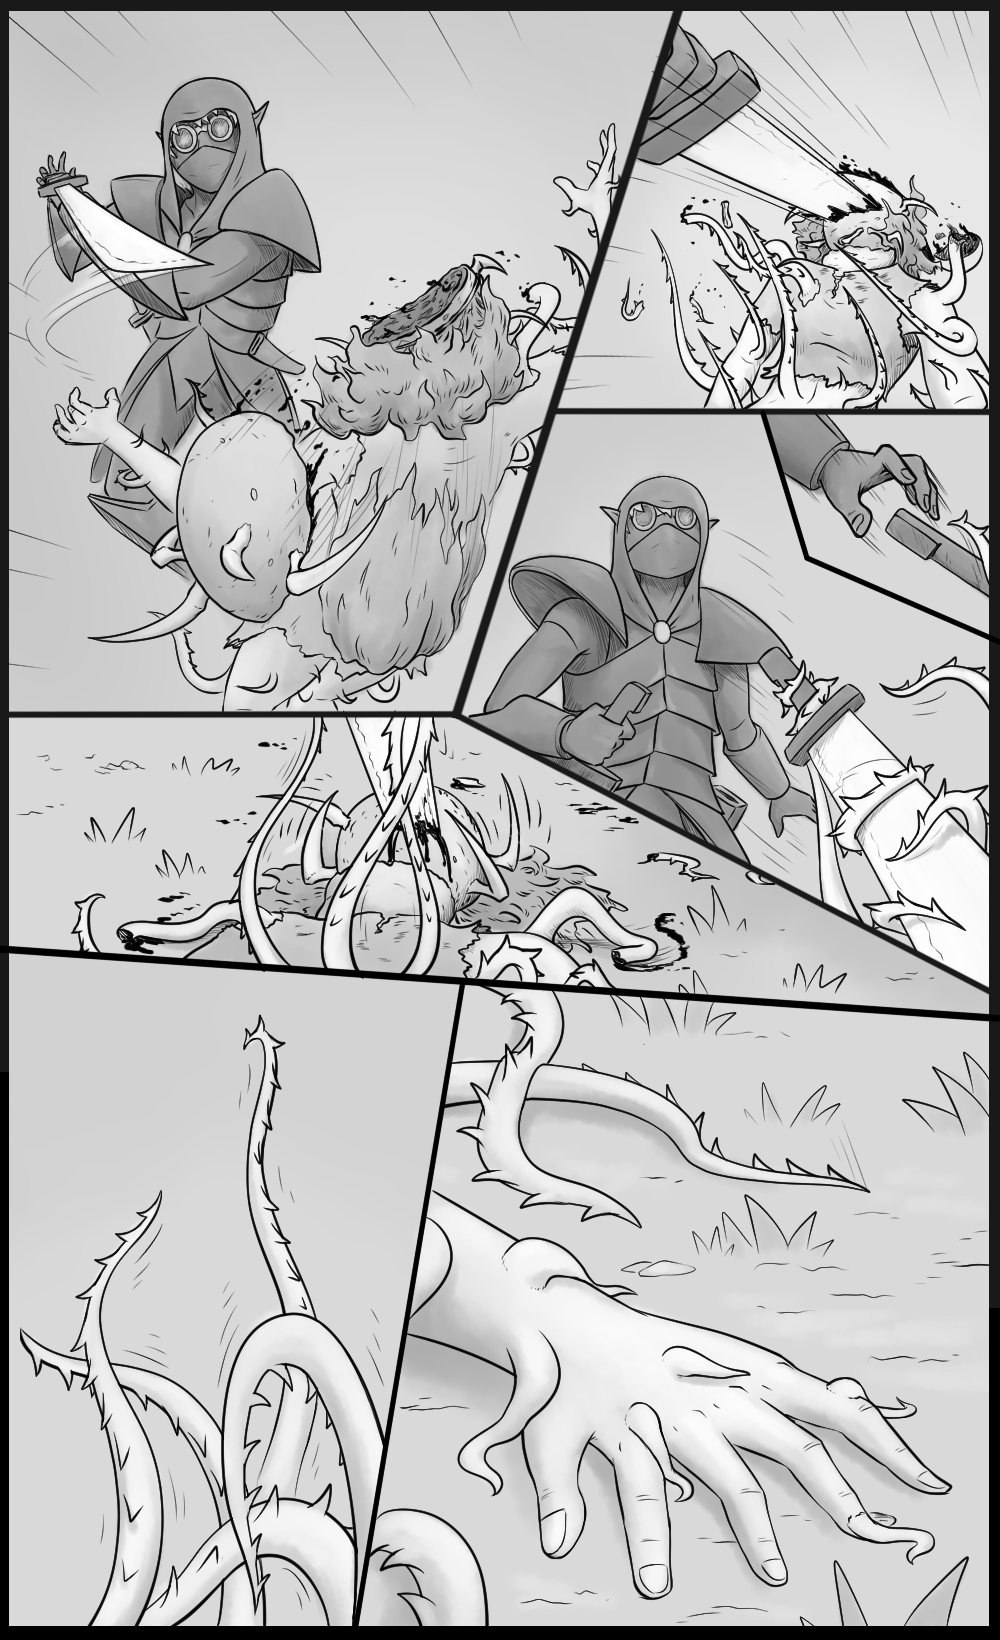 Page 32 - The creature attacks (Part 3)